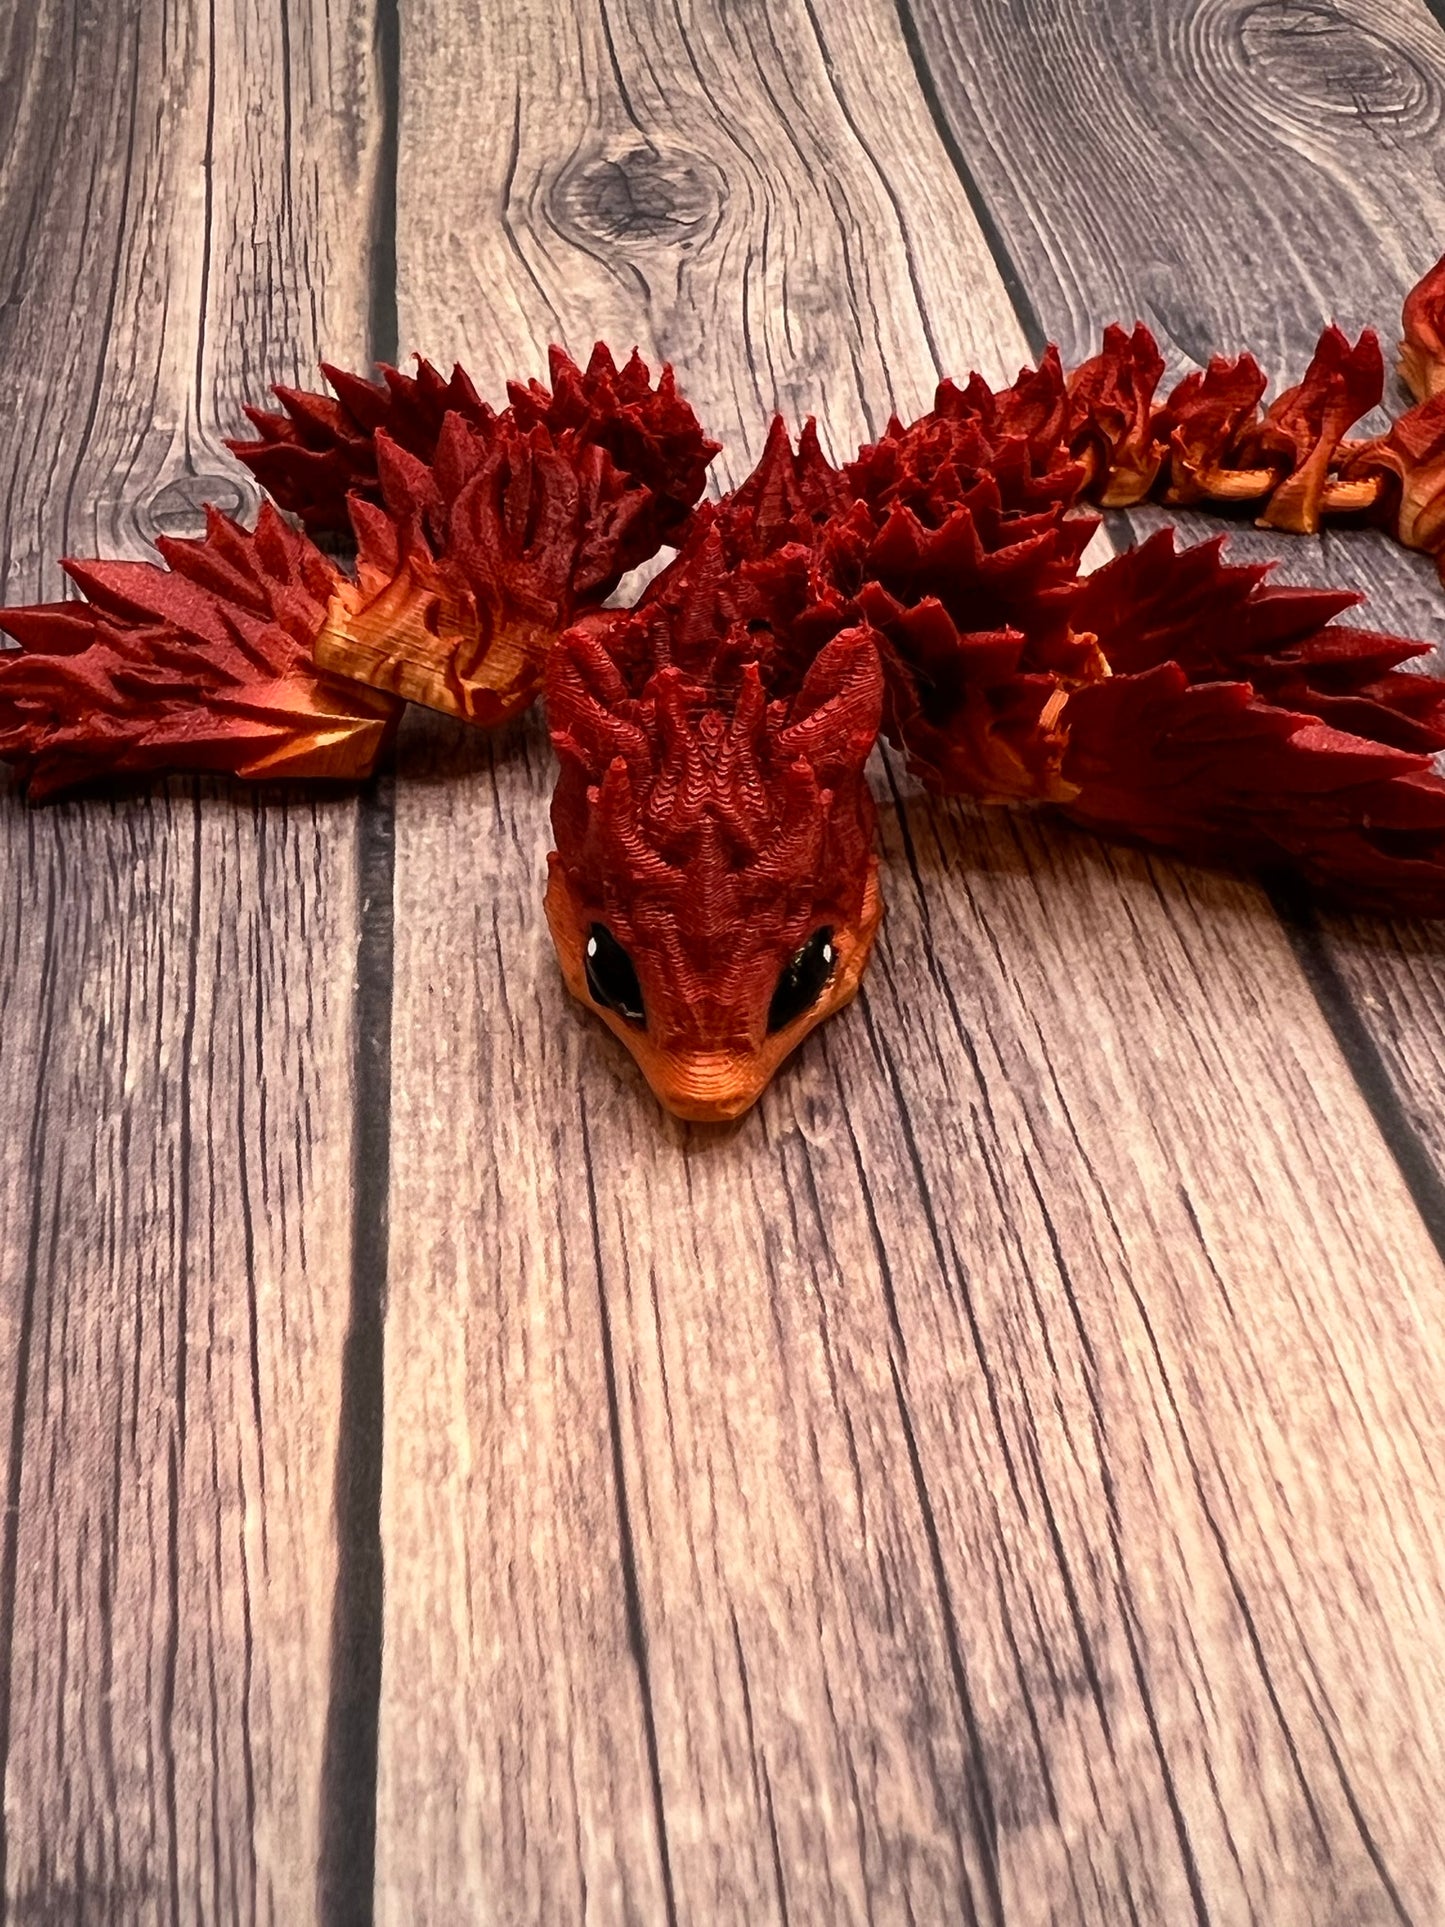 Baby Firewing Dragon - Small